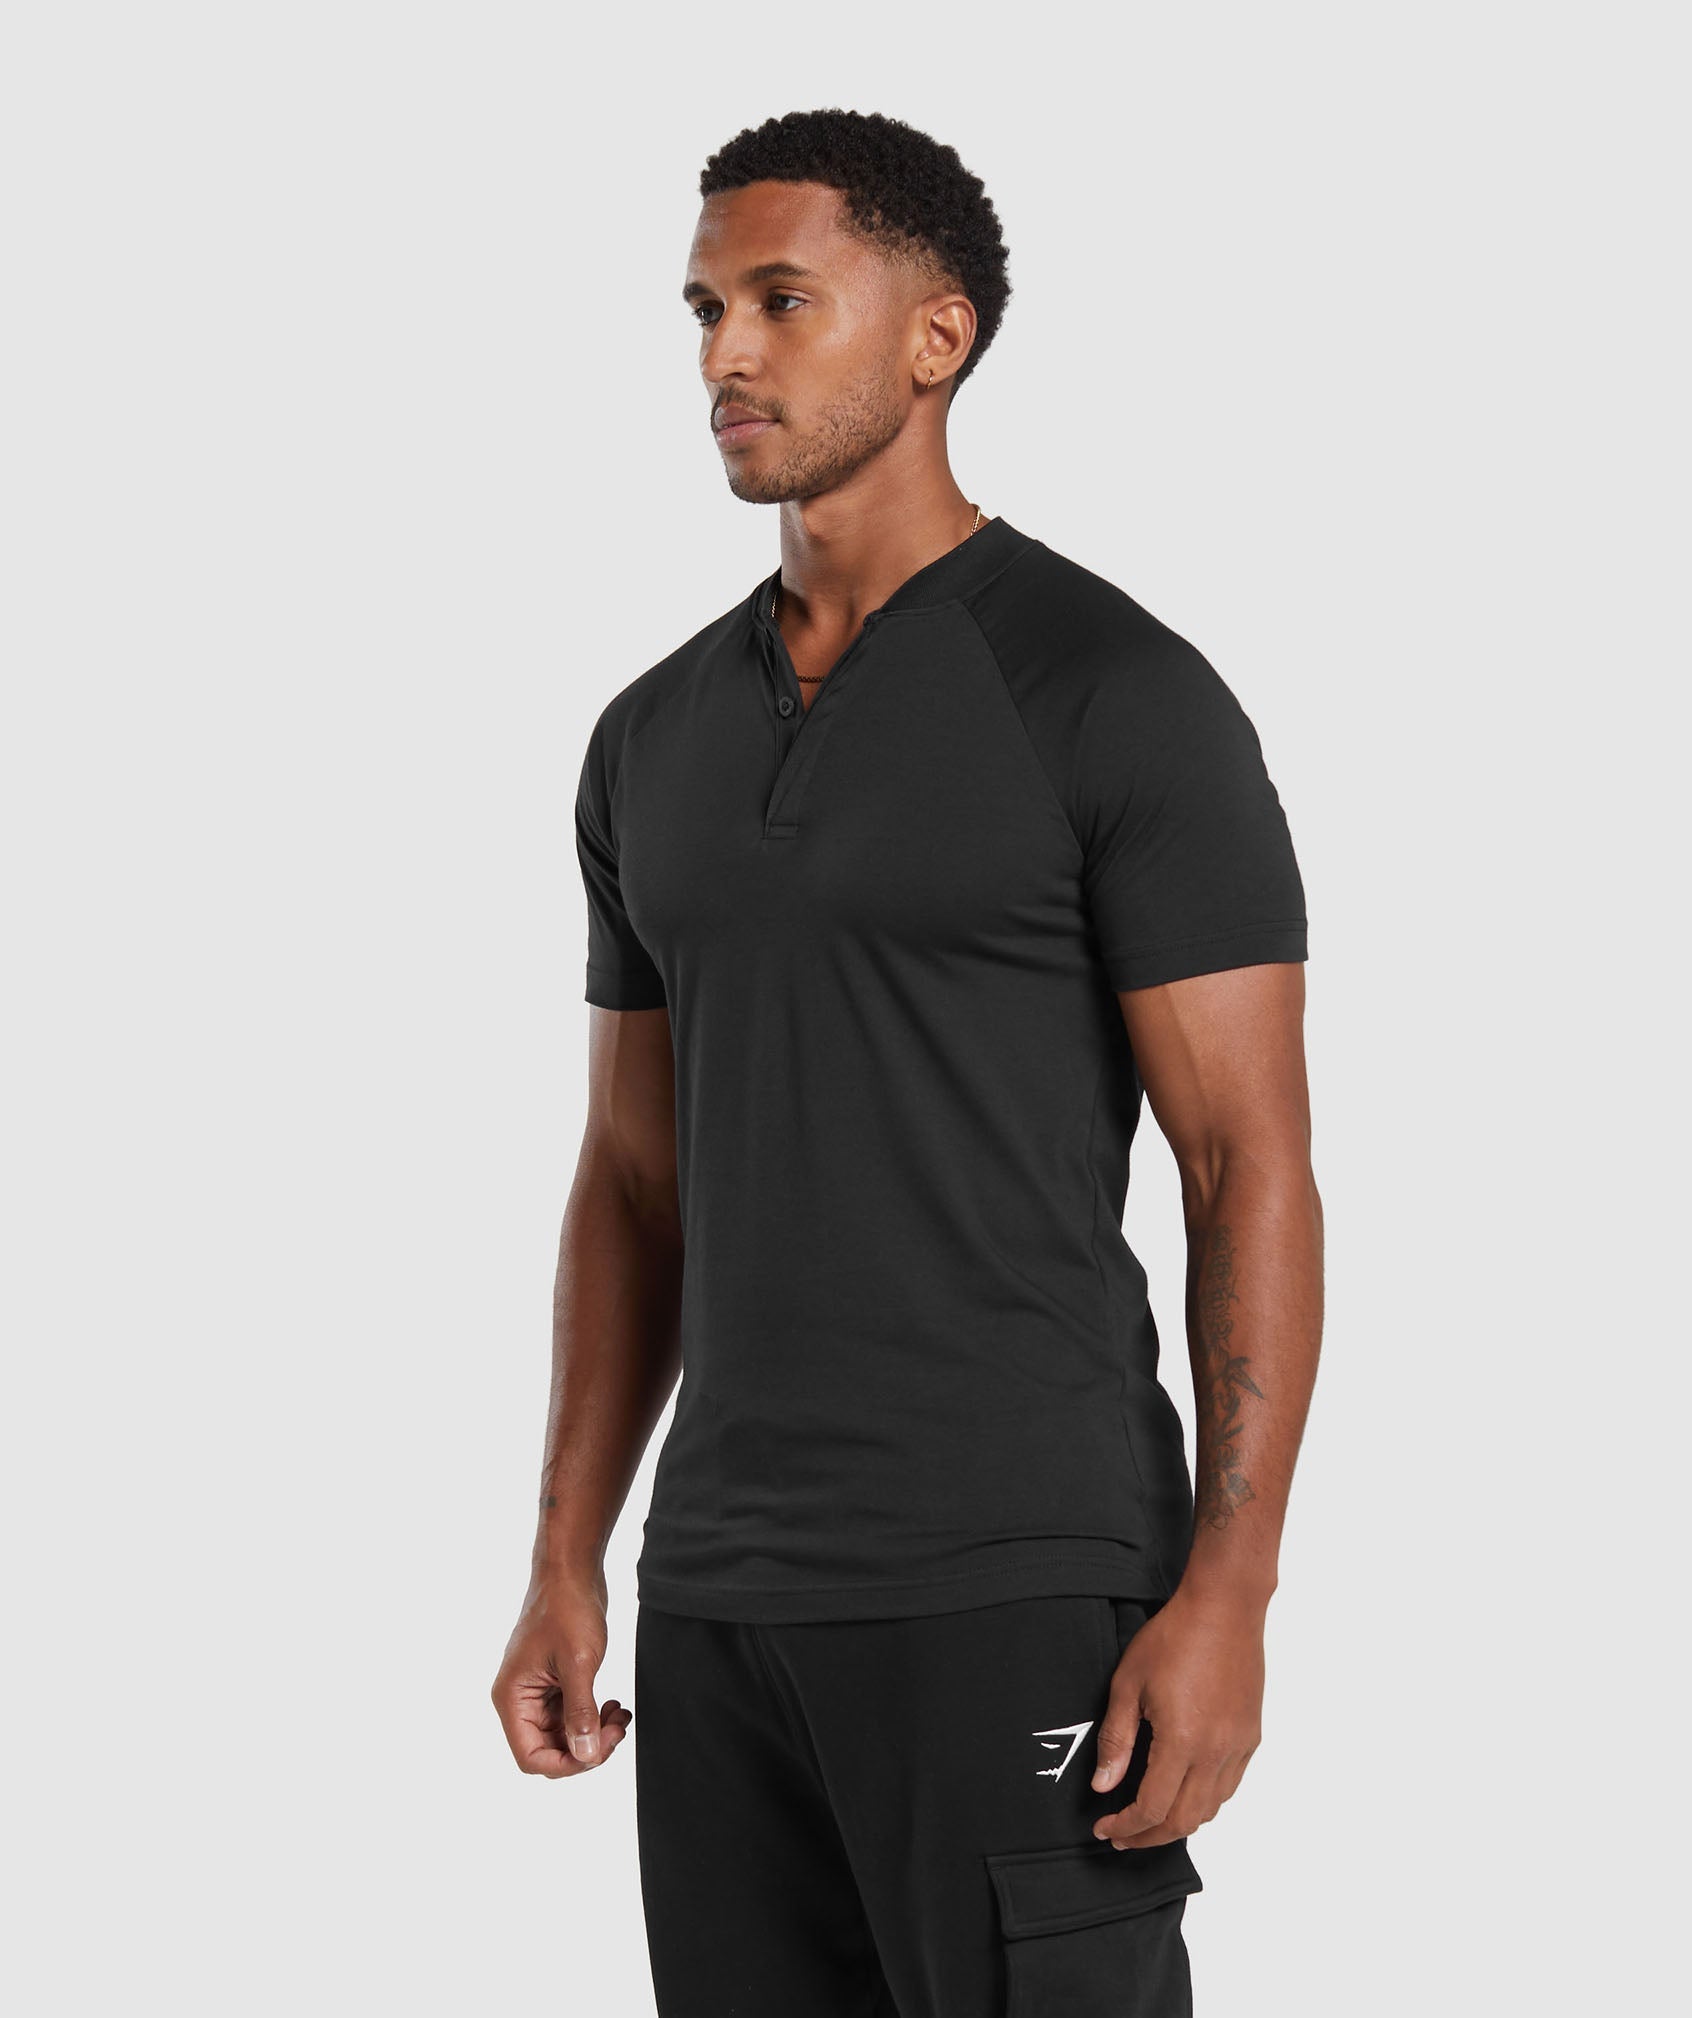 Rest Day Commute Polo Shirt in Black - view 3